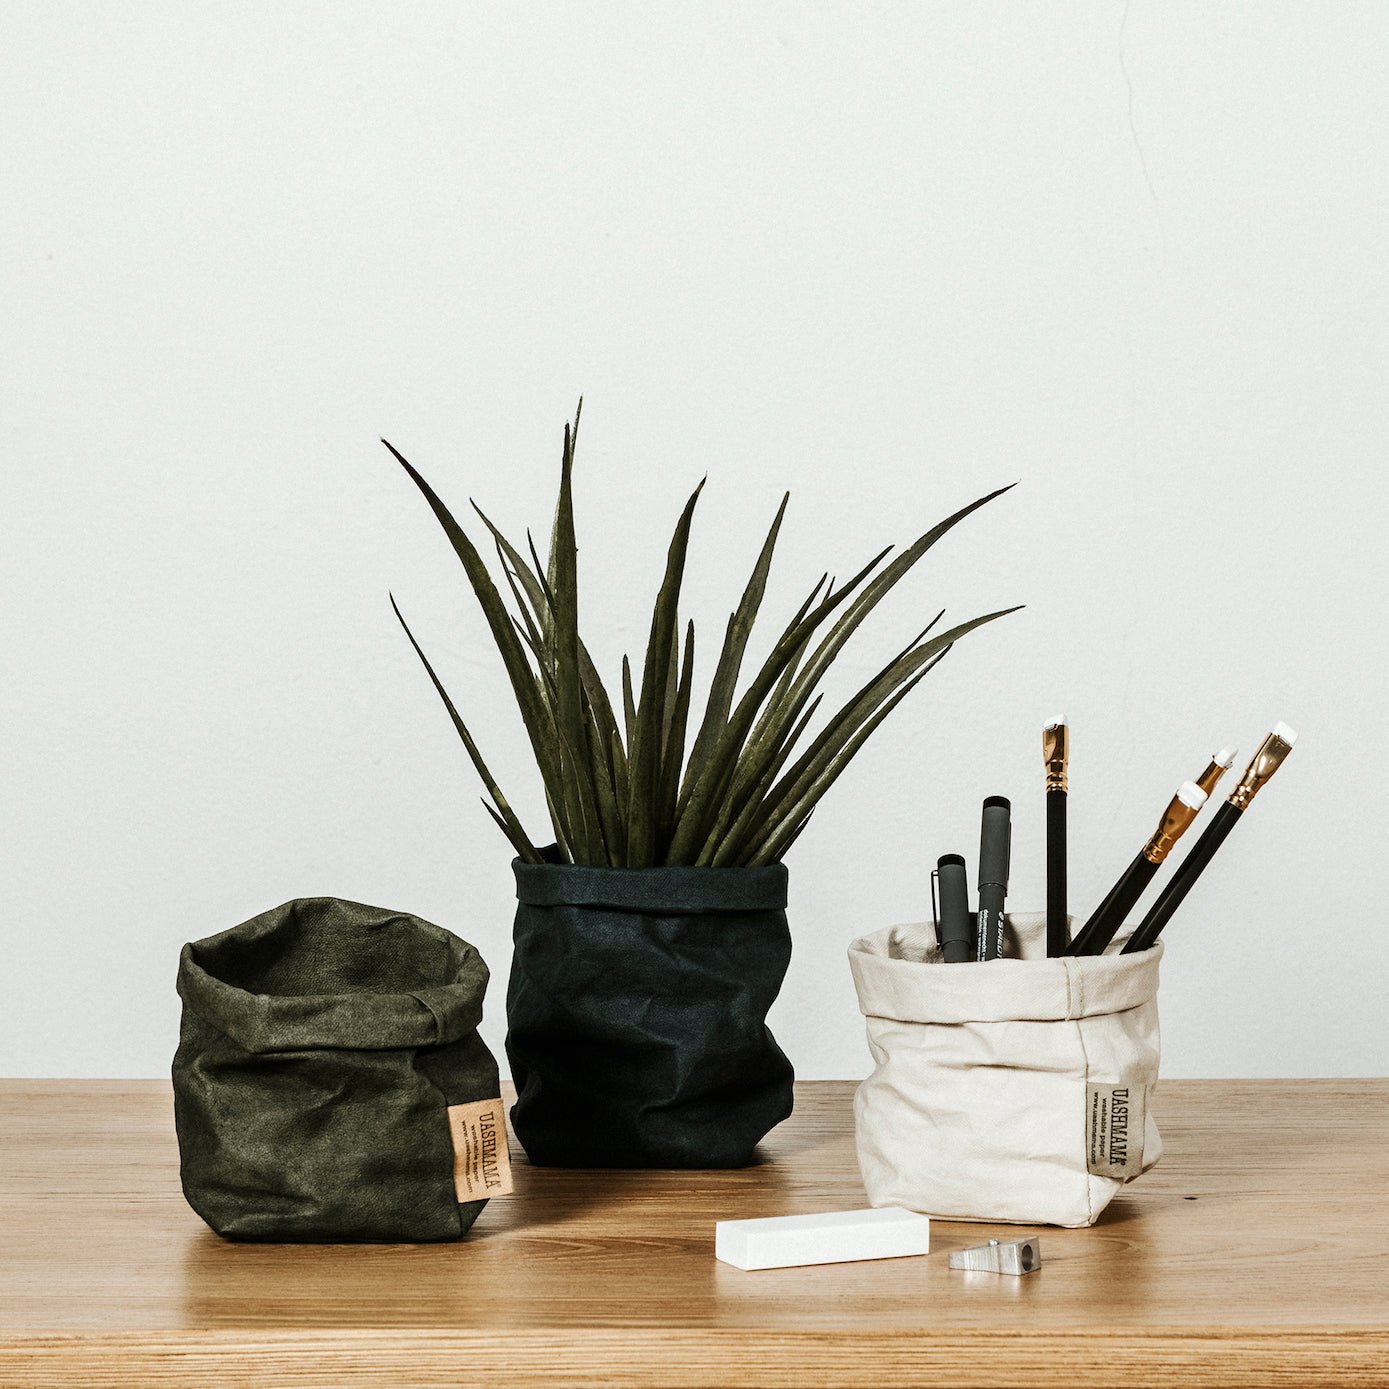 Three extra small washable paper bags are shown on a wooden surface. The one on the left is dark green and shown empty. In the middle the washable paper bag is black and contains a spiky plant. The third bag one the right is pale cream in colour and contains five pencils. In front of the bags is a pencil sharpener and eraser.